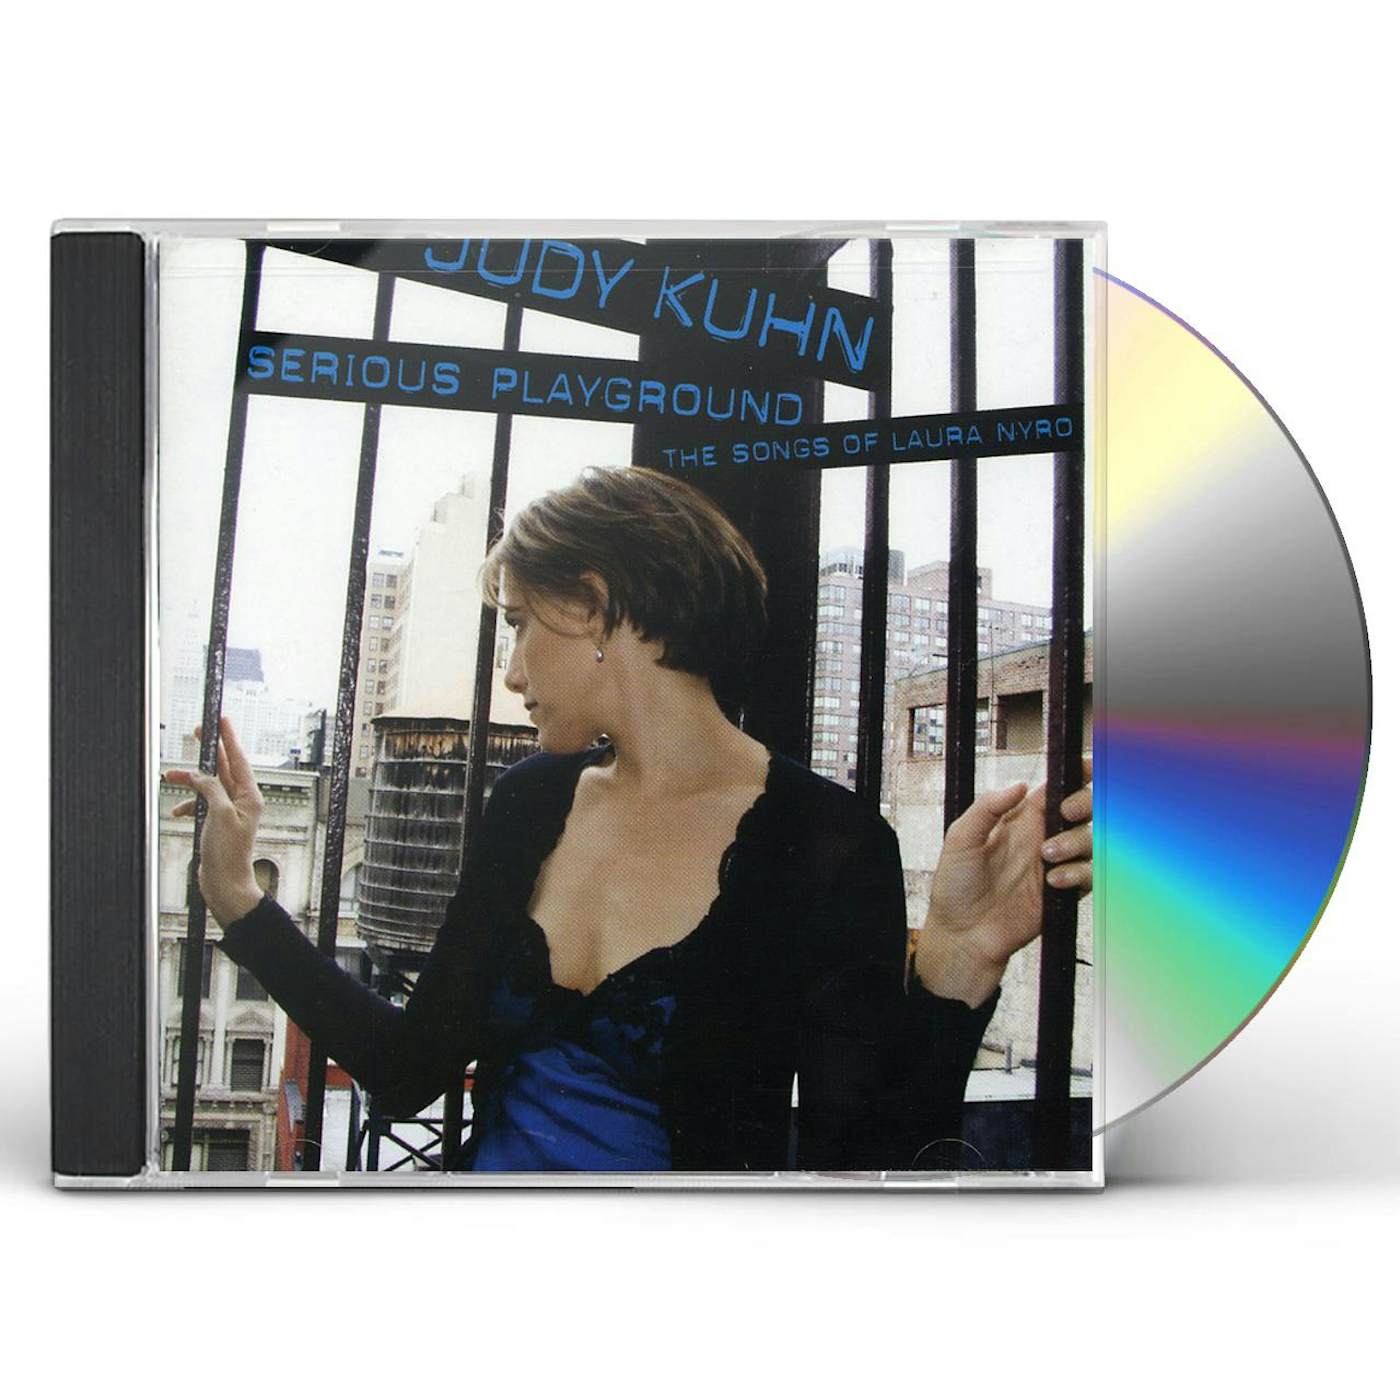 Judy Kuhn SERIOUS PLAYGROUND: THE SONGS OF LAURA NYRO CD